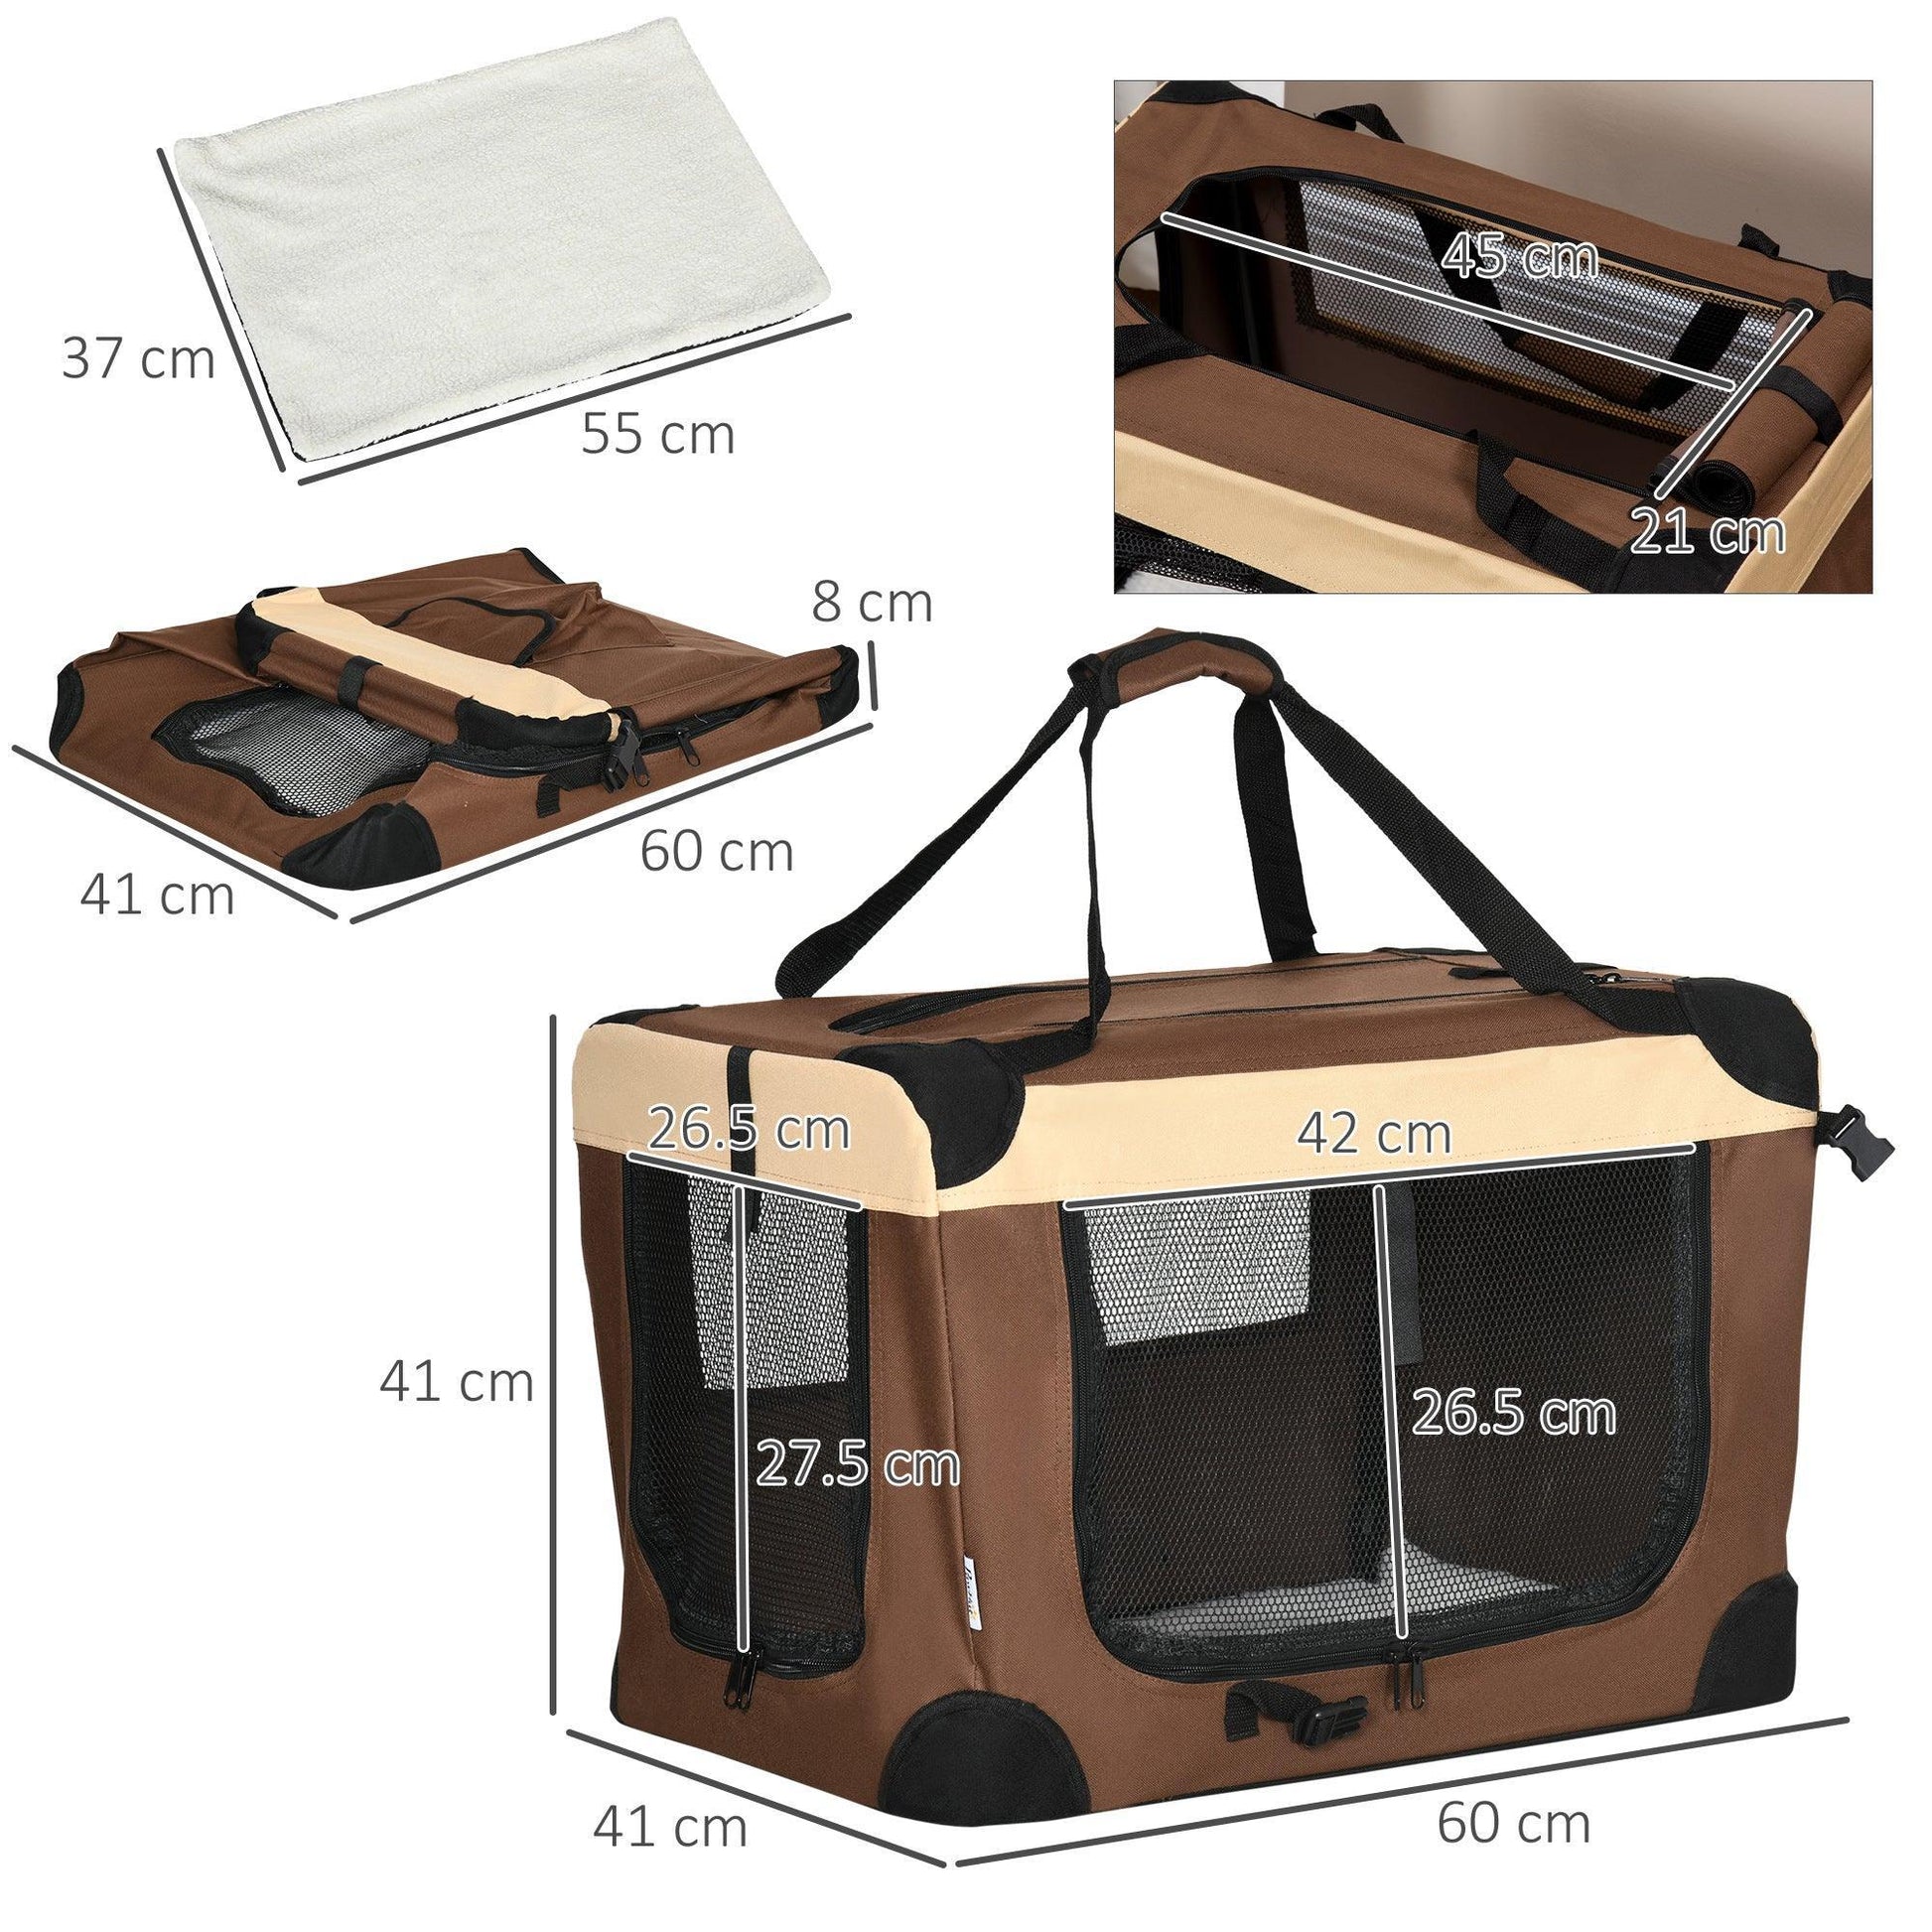 PawHut Foldable Pet Carrier for Small Dogs and Cats - Brown - ALL4U RETAILER LTD